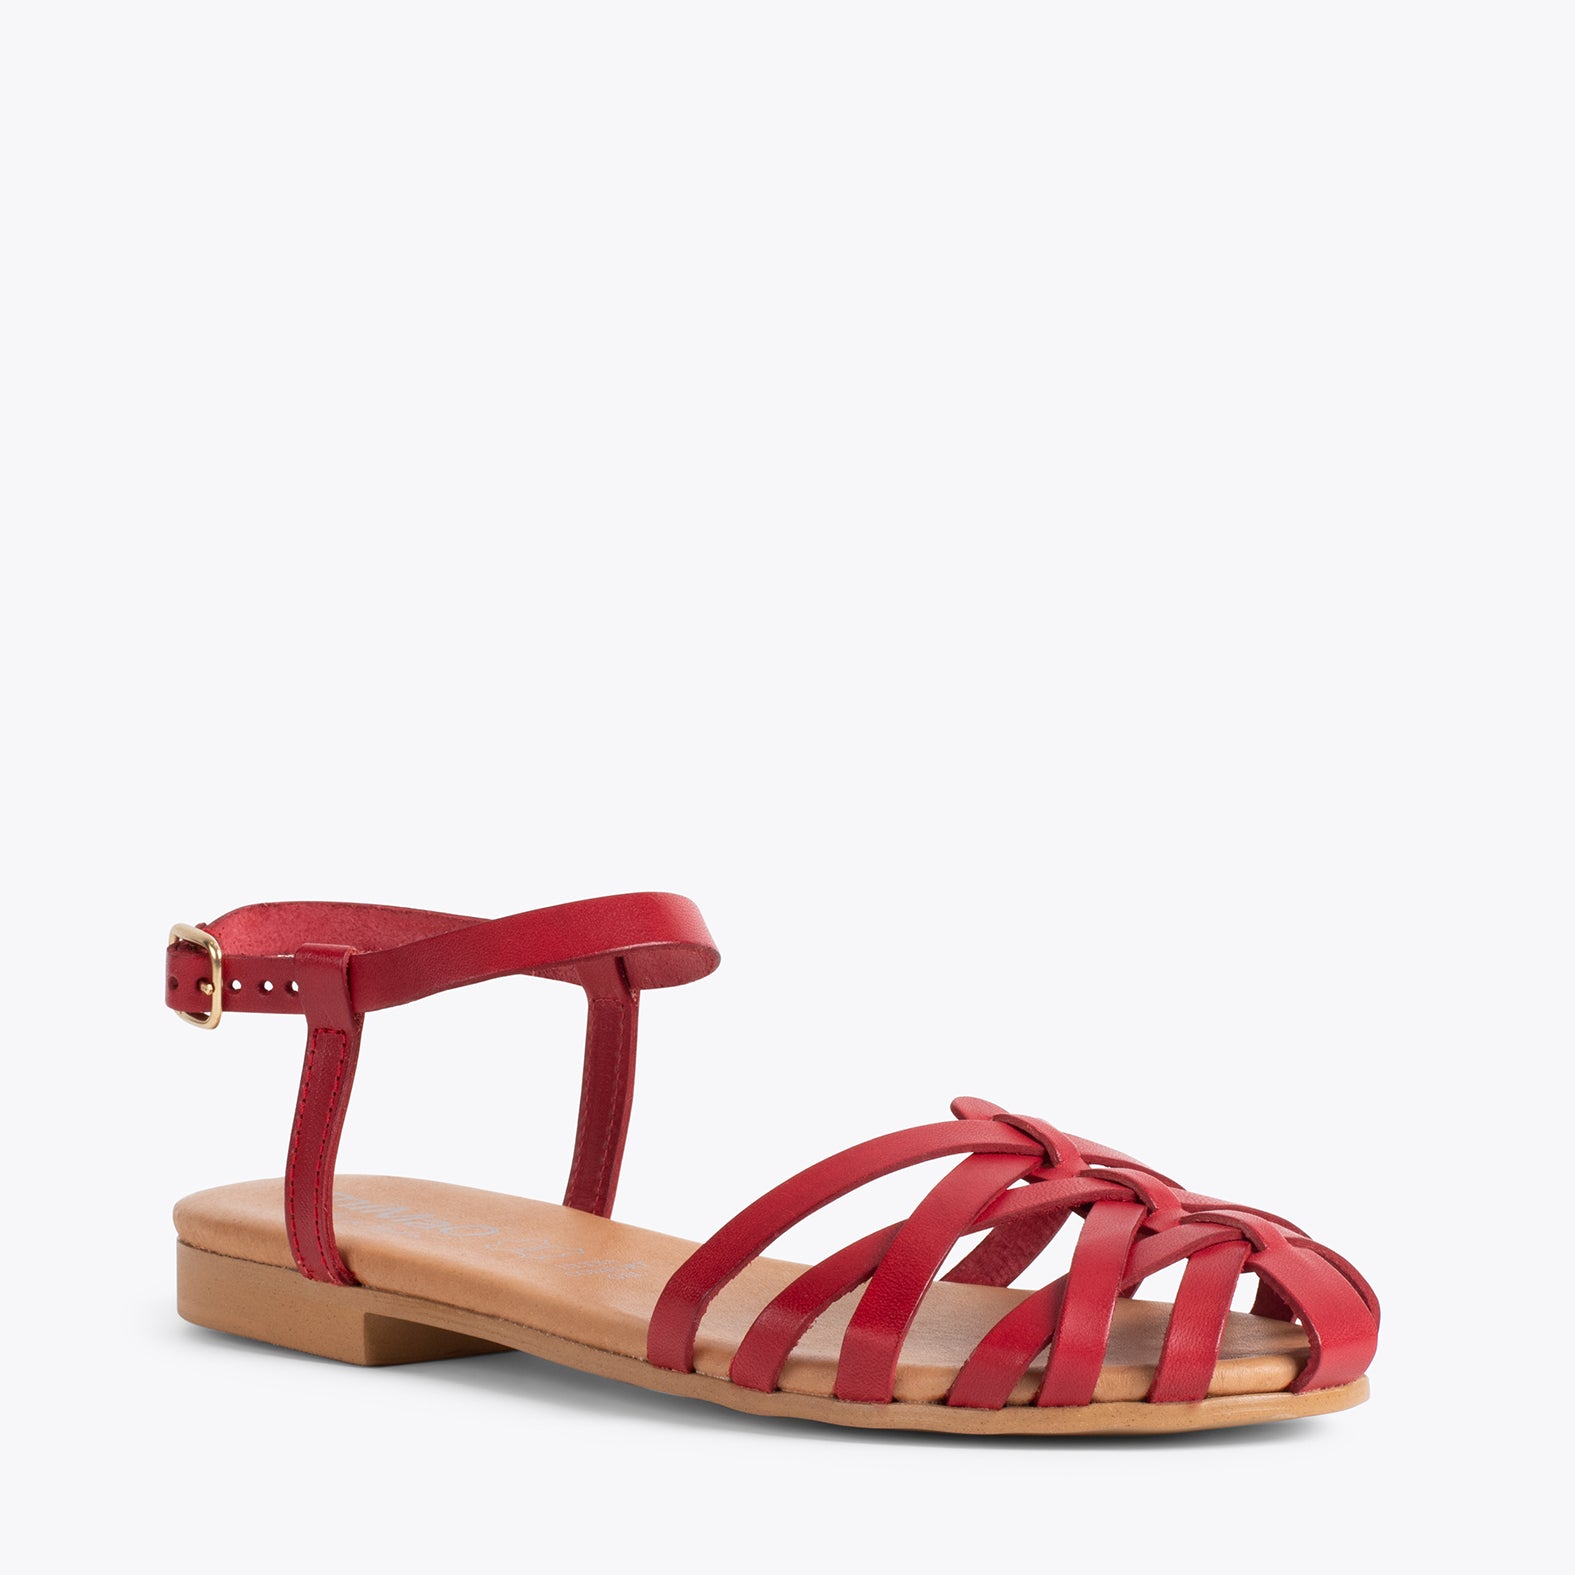 BEACH - RED sandal with straps